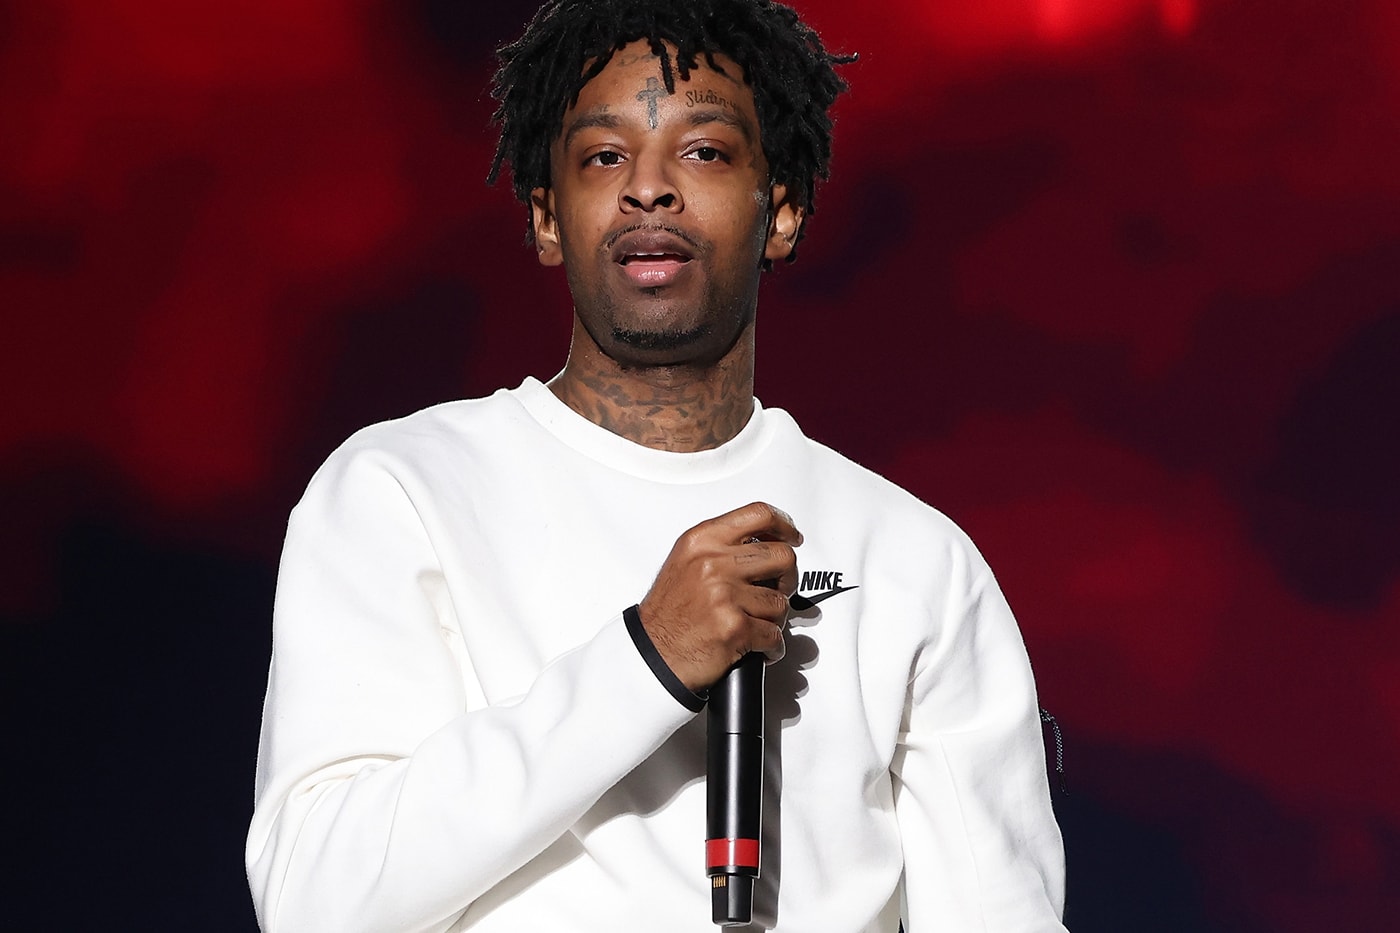 21Savage stepped out with a new look some saying looks very